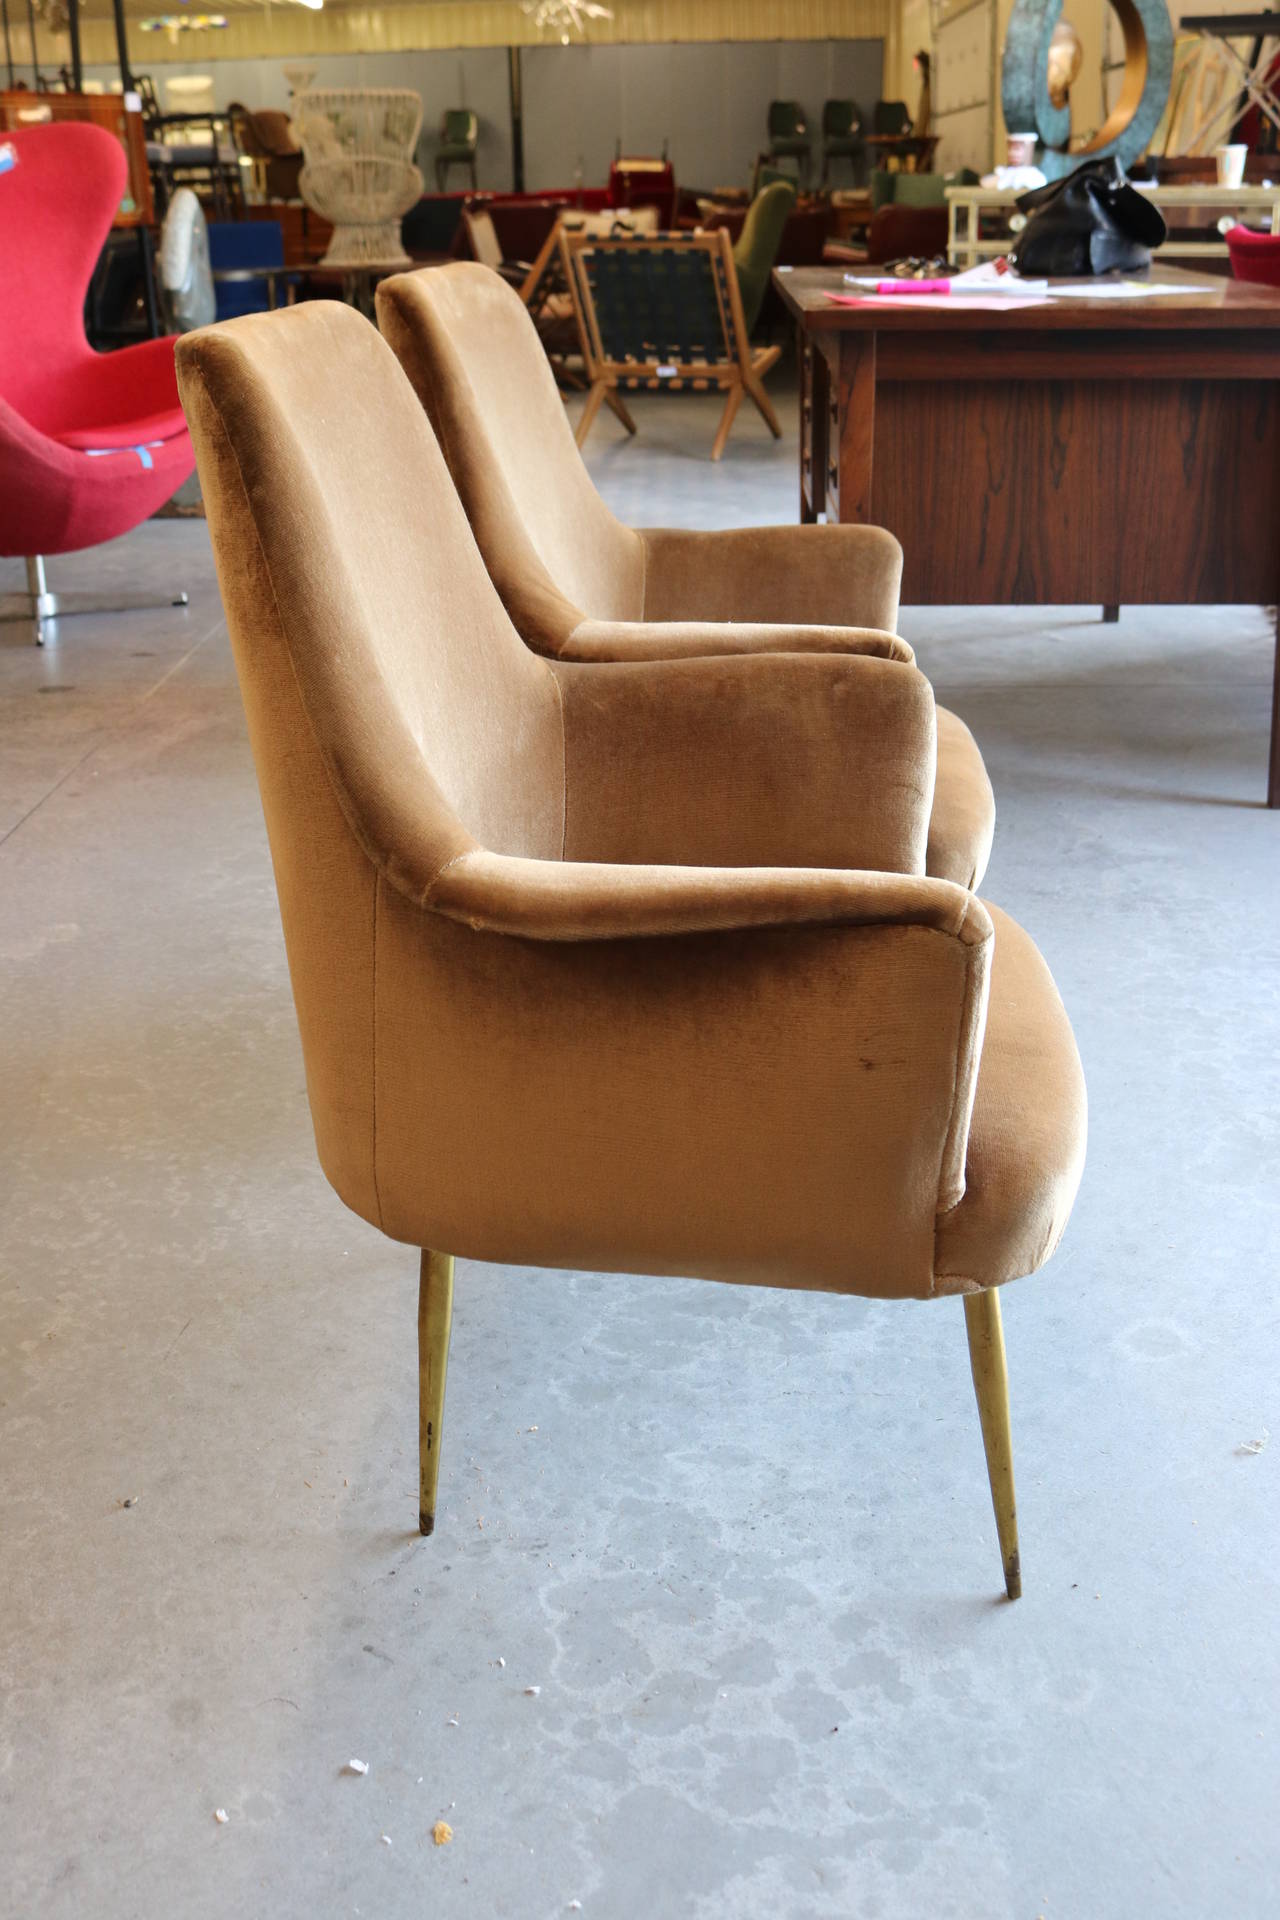 This is a lovely sculptural pair of mid century armchairs made in Italy in the 1950's. Covered in a creamy camel velvet, these chairs are gorgeous, but do show wear. Velvet is crushed in areas, and brass legs have surface scratches. Neither of these